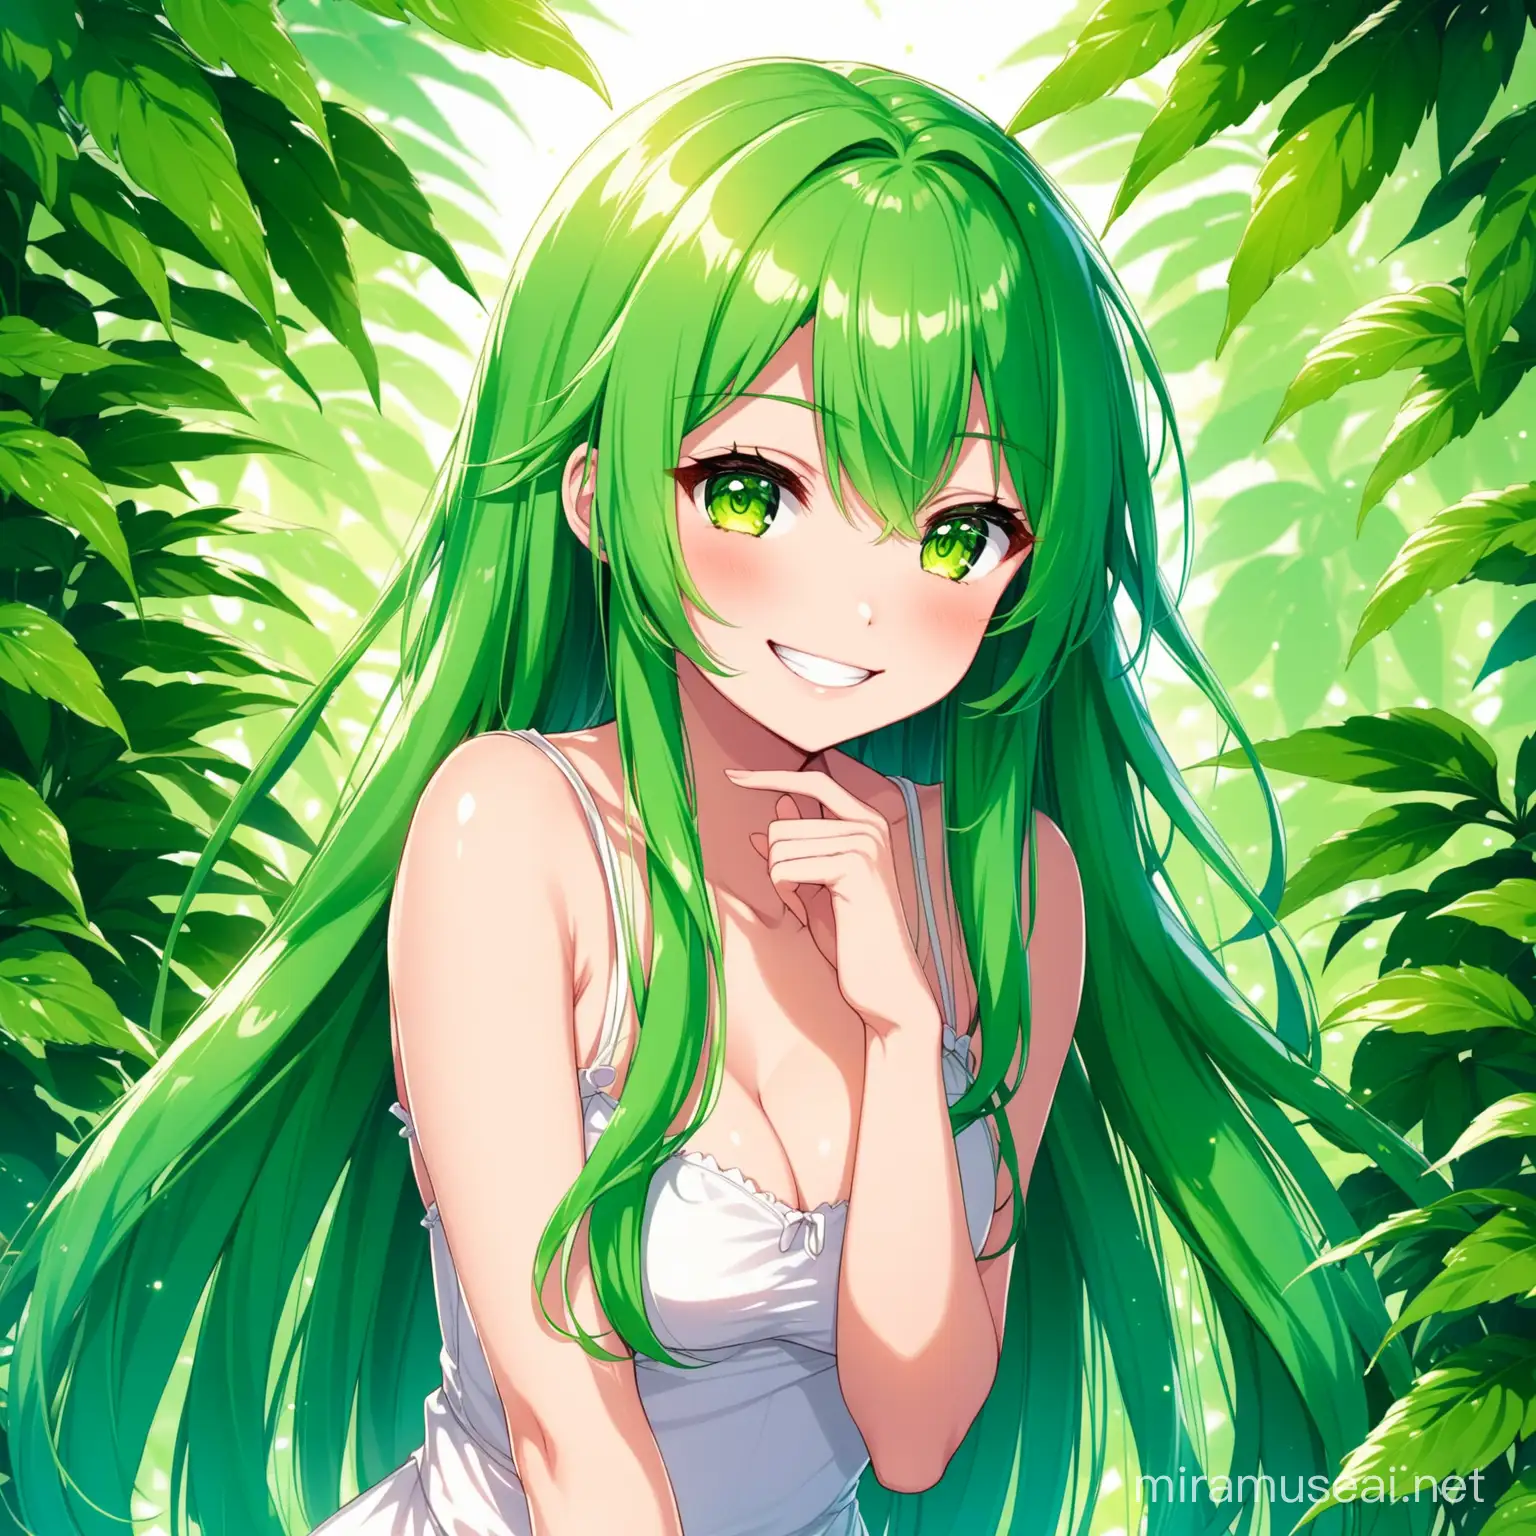 anime girl, green long hair, with green plants background, naughty smile, flirty